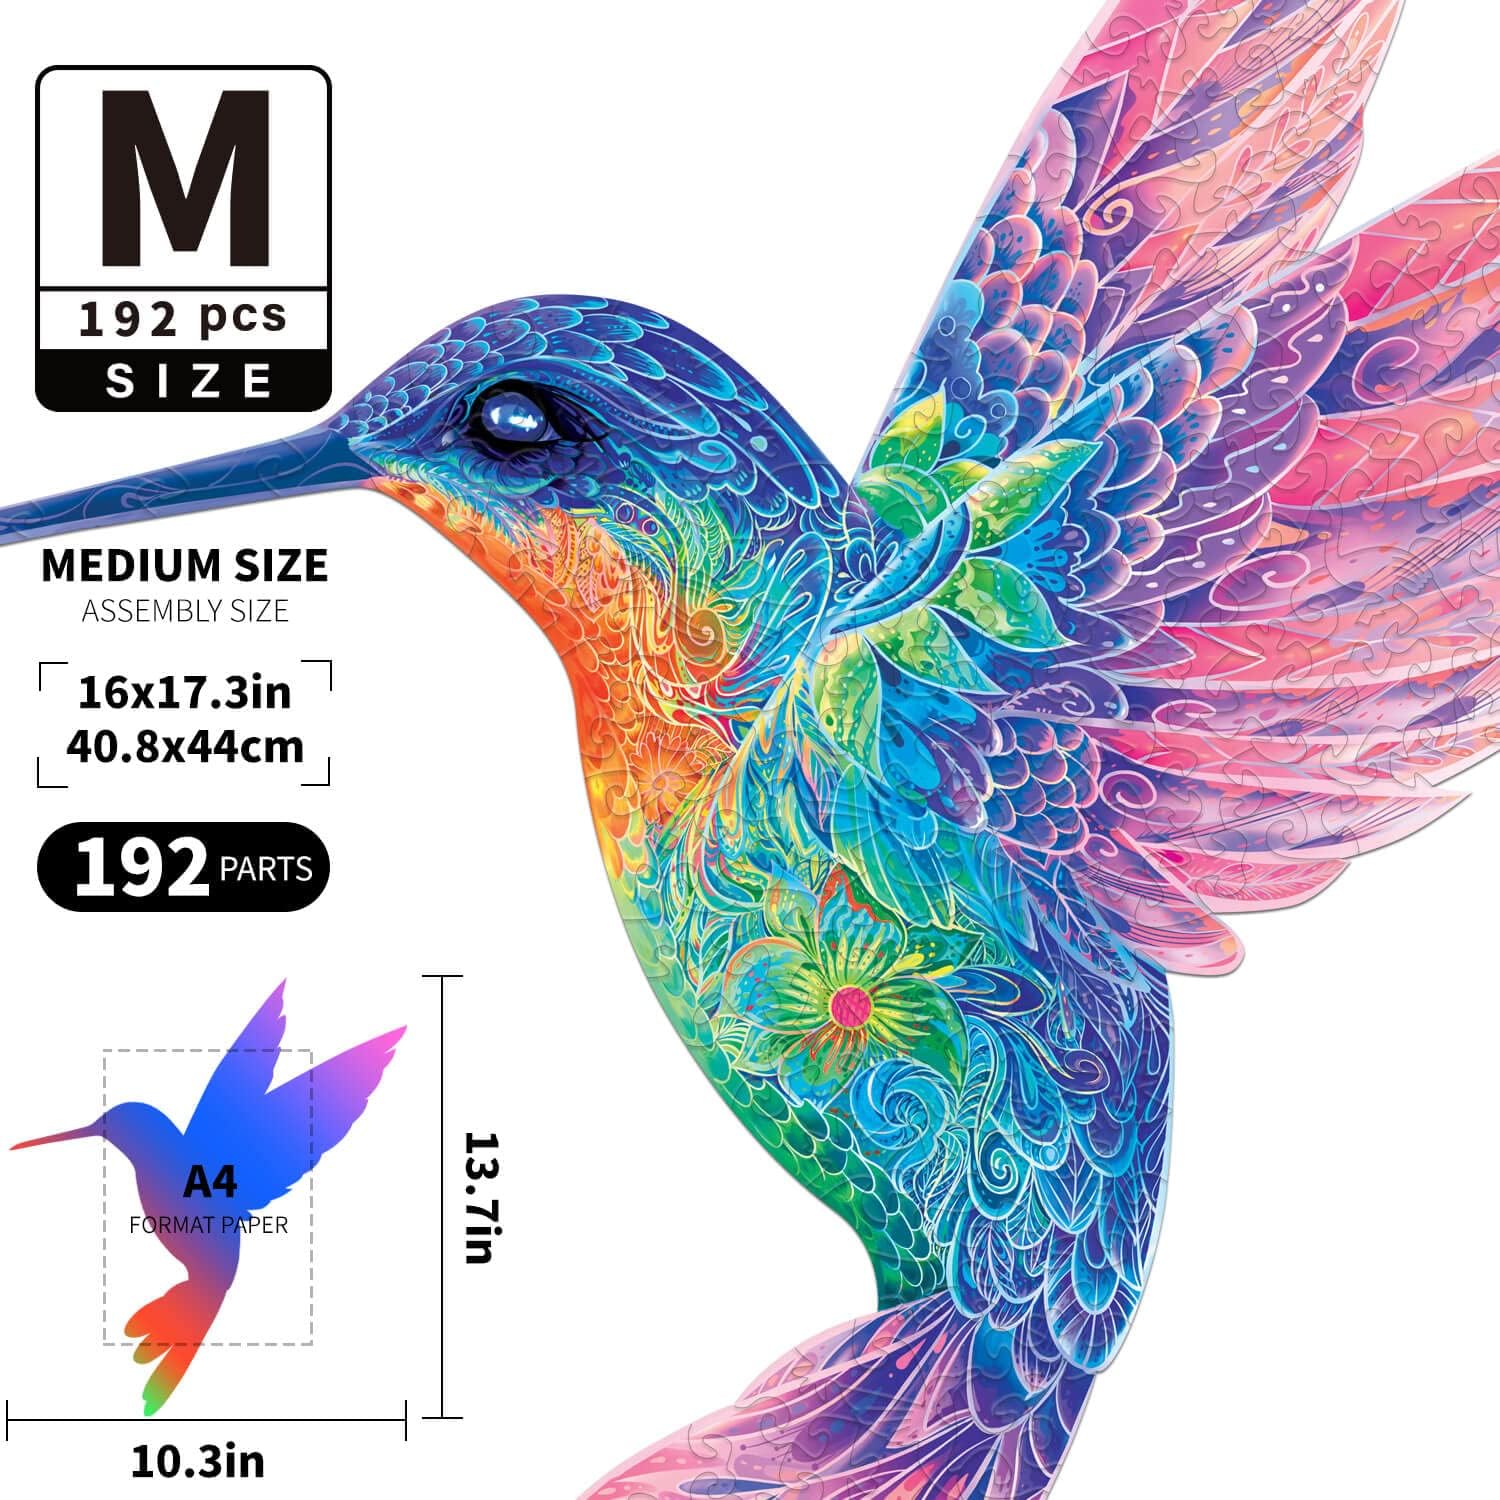 192pcs Hummingbird Wooden Puzzle for Adults, Version 2.1 Animal Unique Shaped Wooden Jigsaw Puzzles for Adults - 16 x 17.3 Inches with 12 Uniquely-Shaped Large Pieces, Best Gift for Adults…